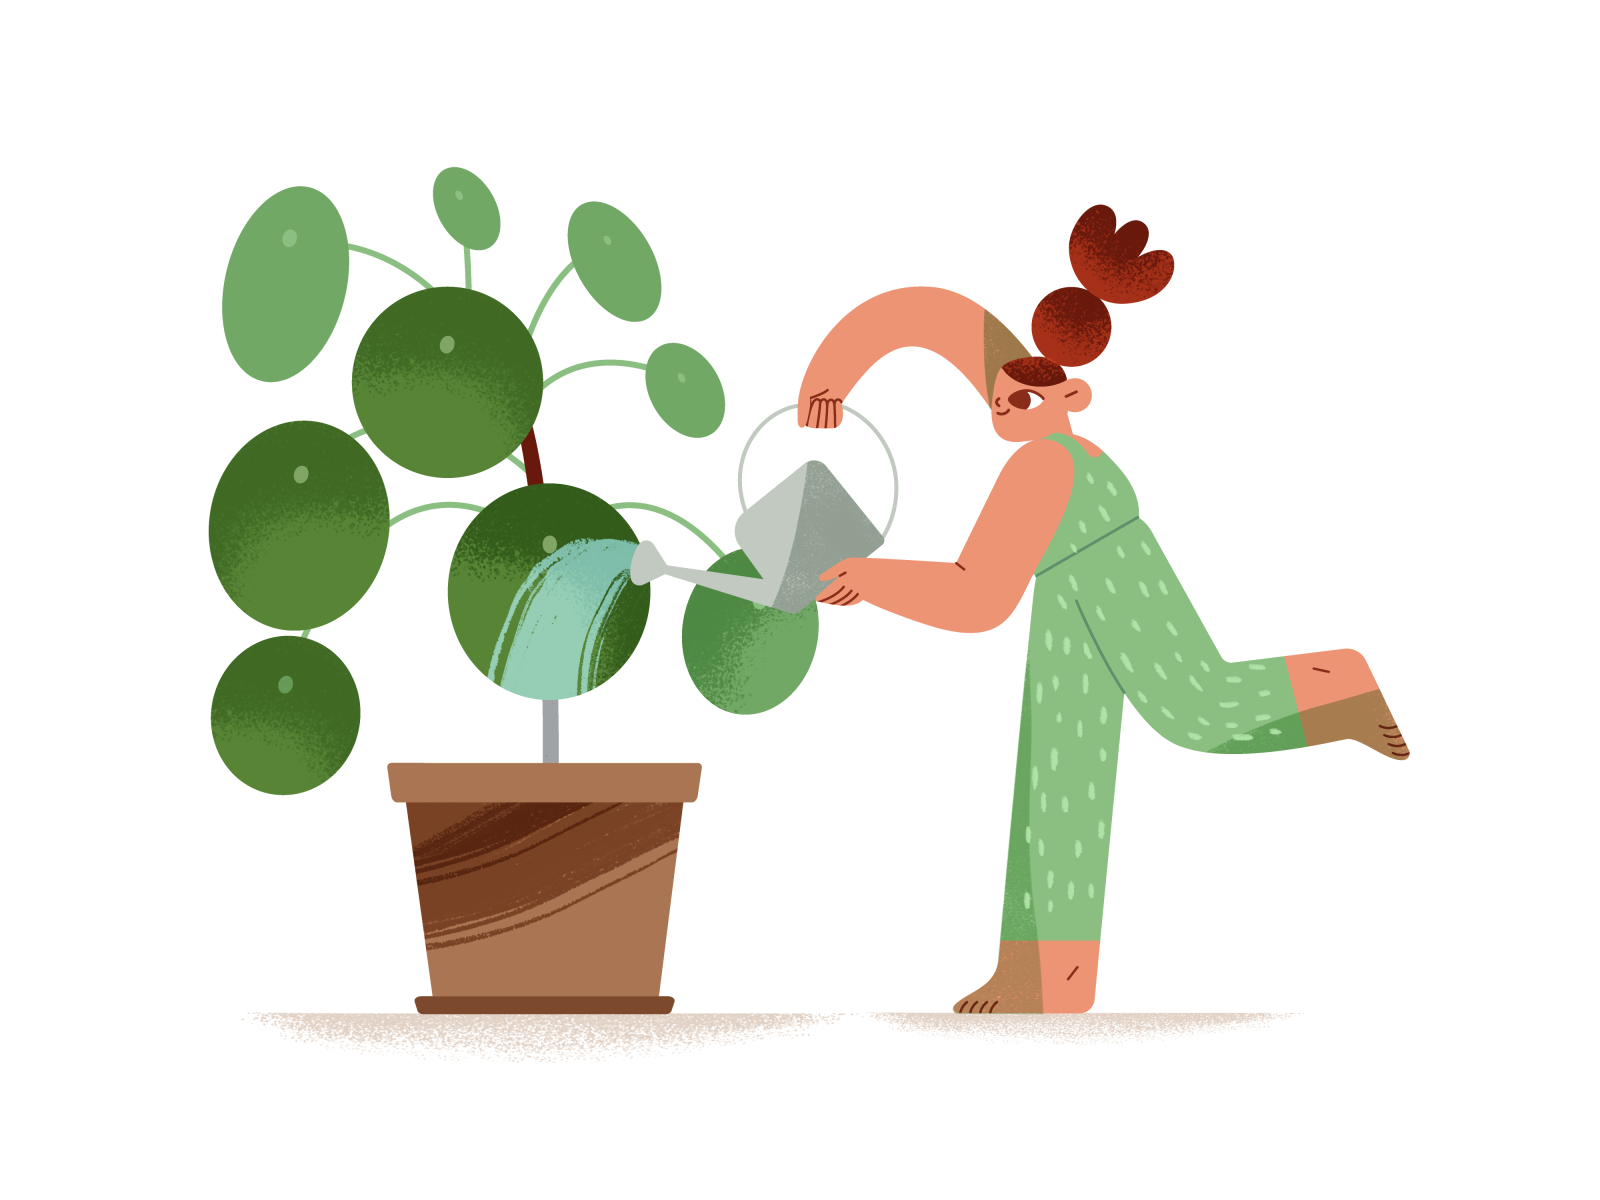 Watering schedule by Diana Traykov on Dribbble